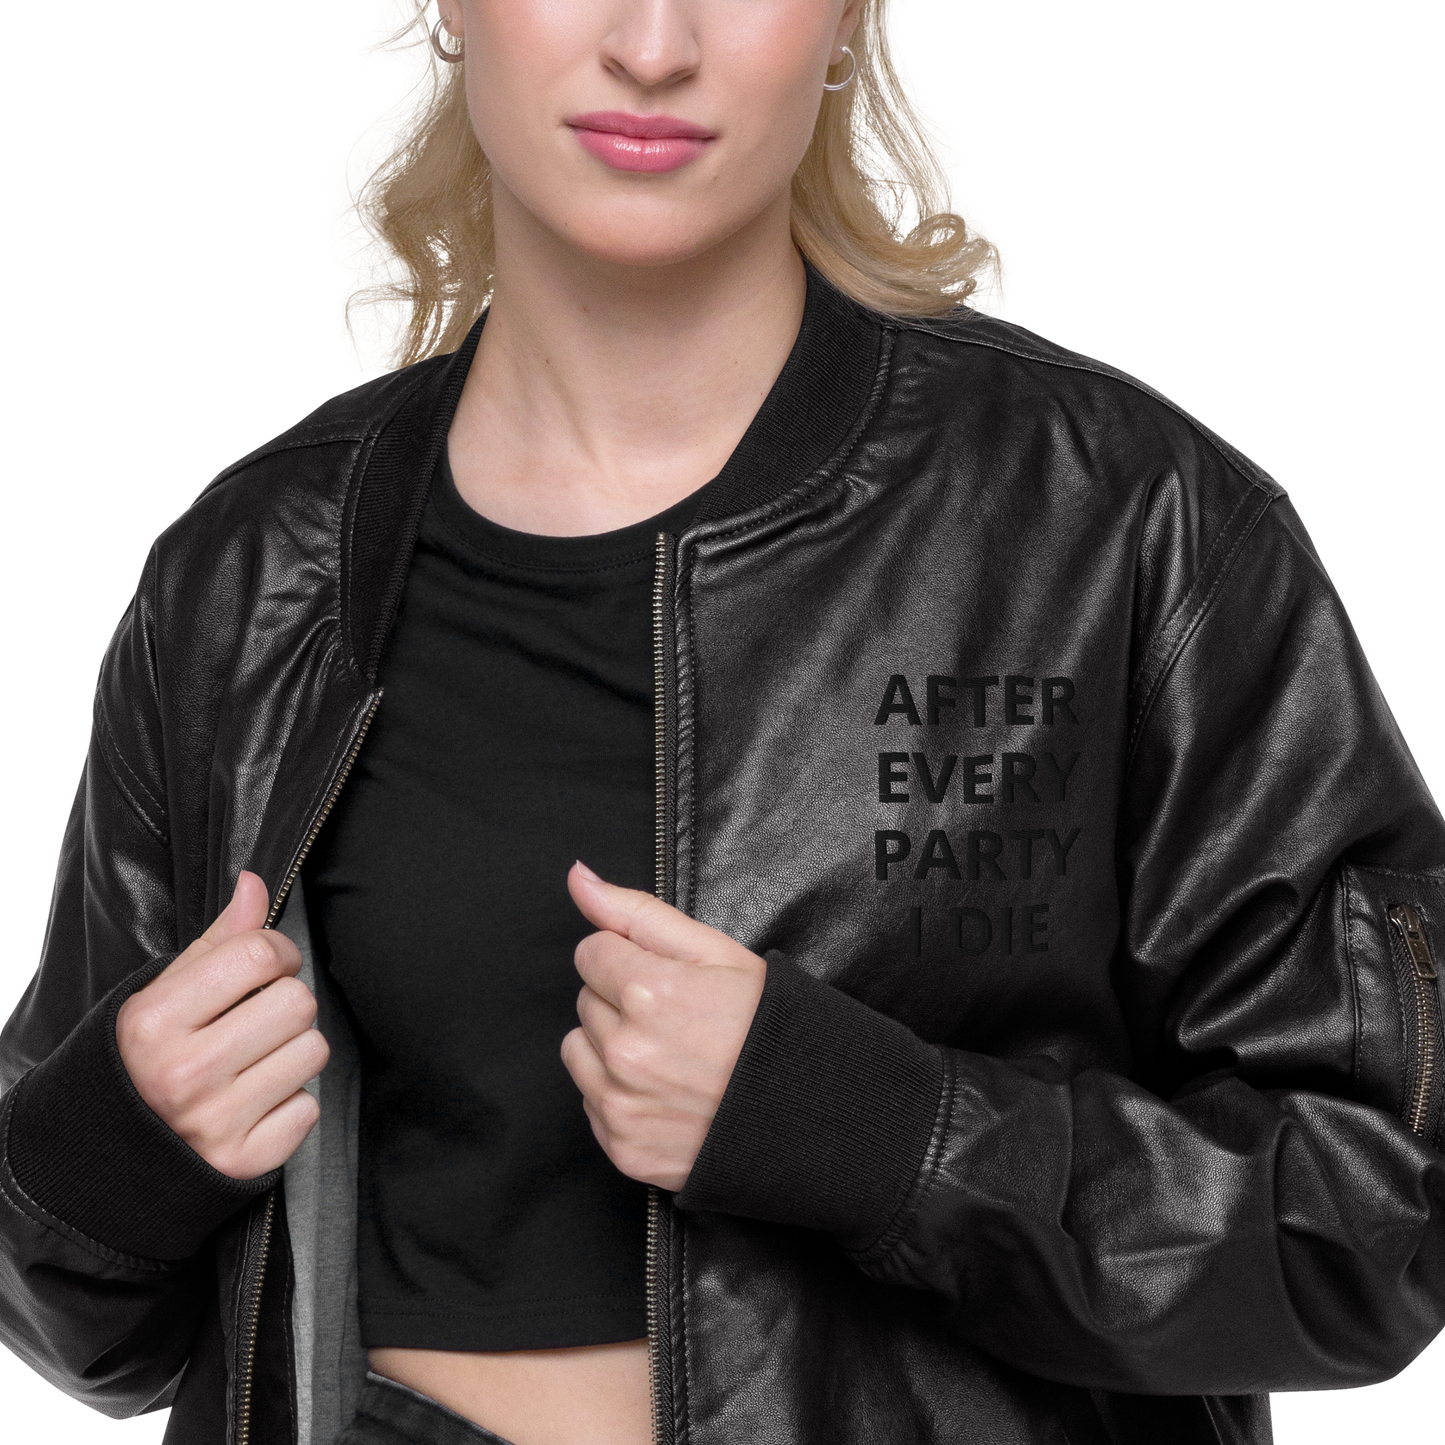 Faux Leather Bomber Jacket - After Every Party I Die - Embroidered Black On Black